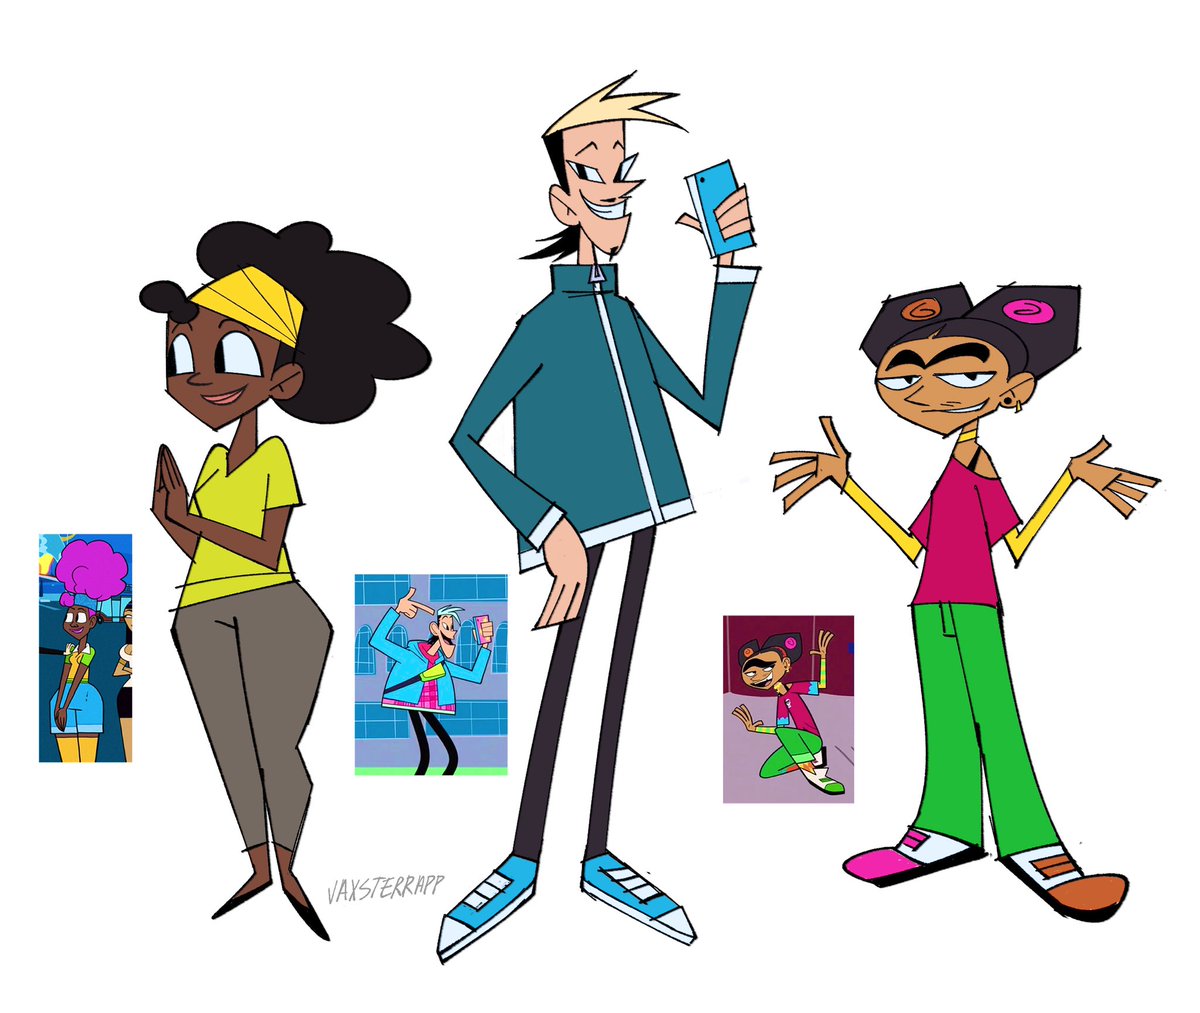 redesigns of the new cast #clonehighseason2